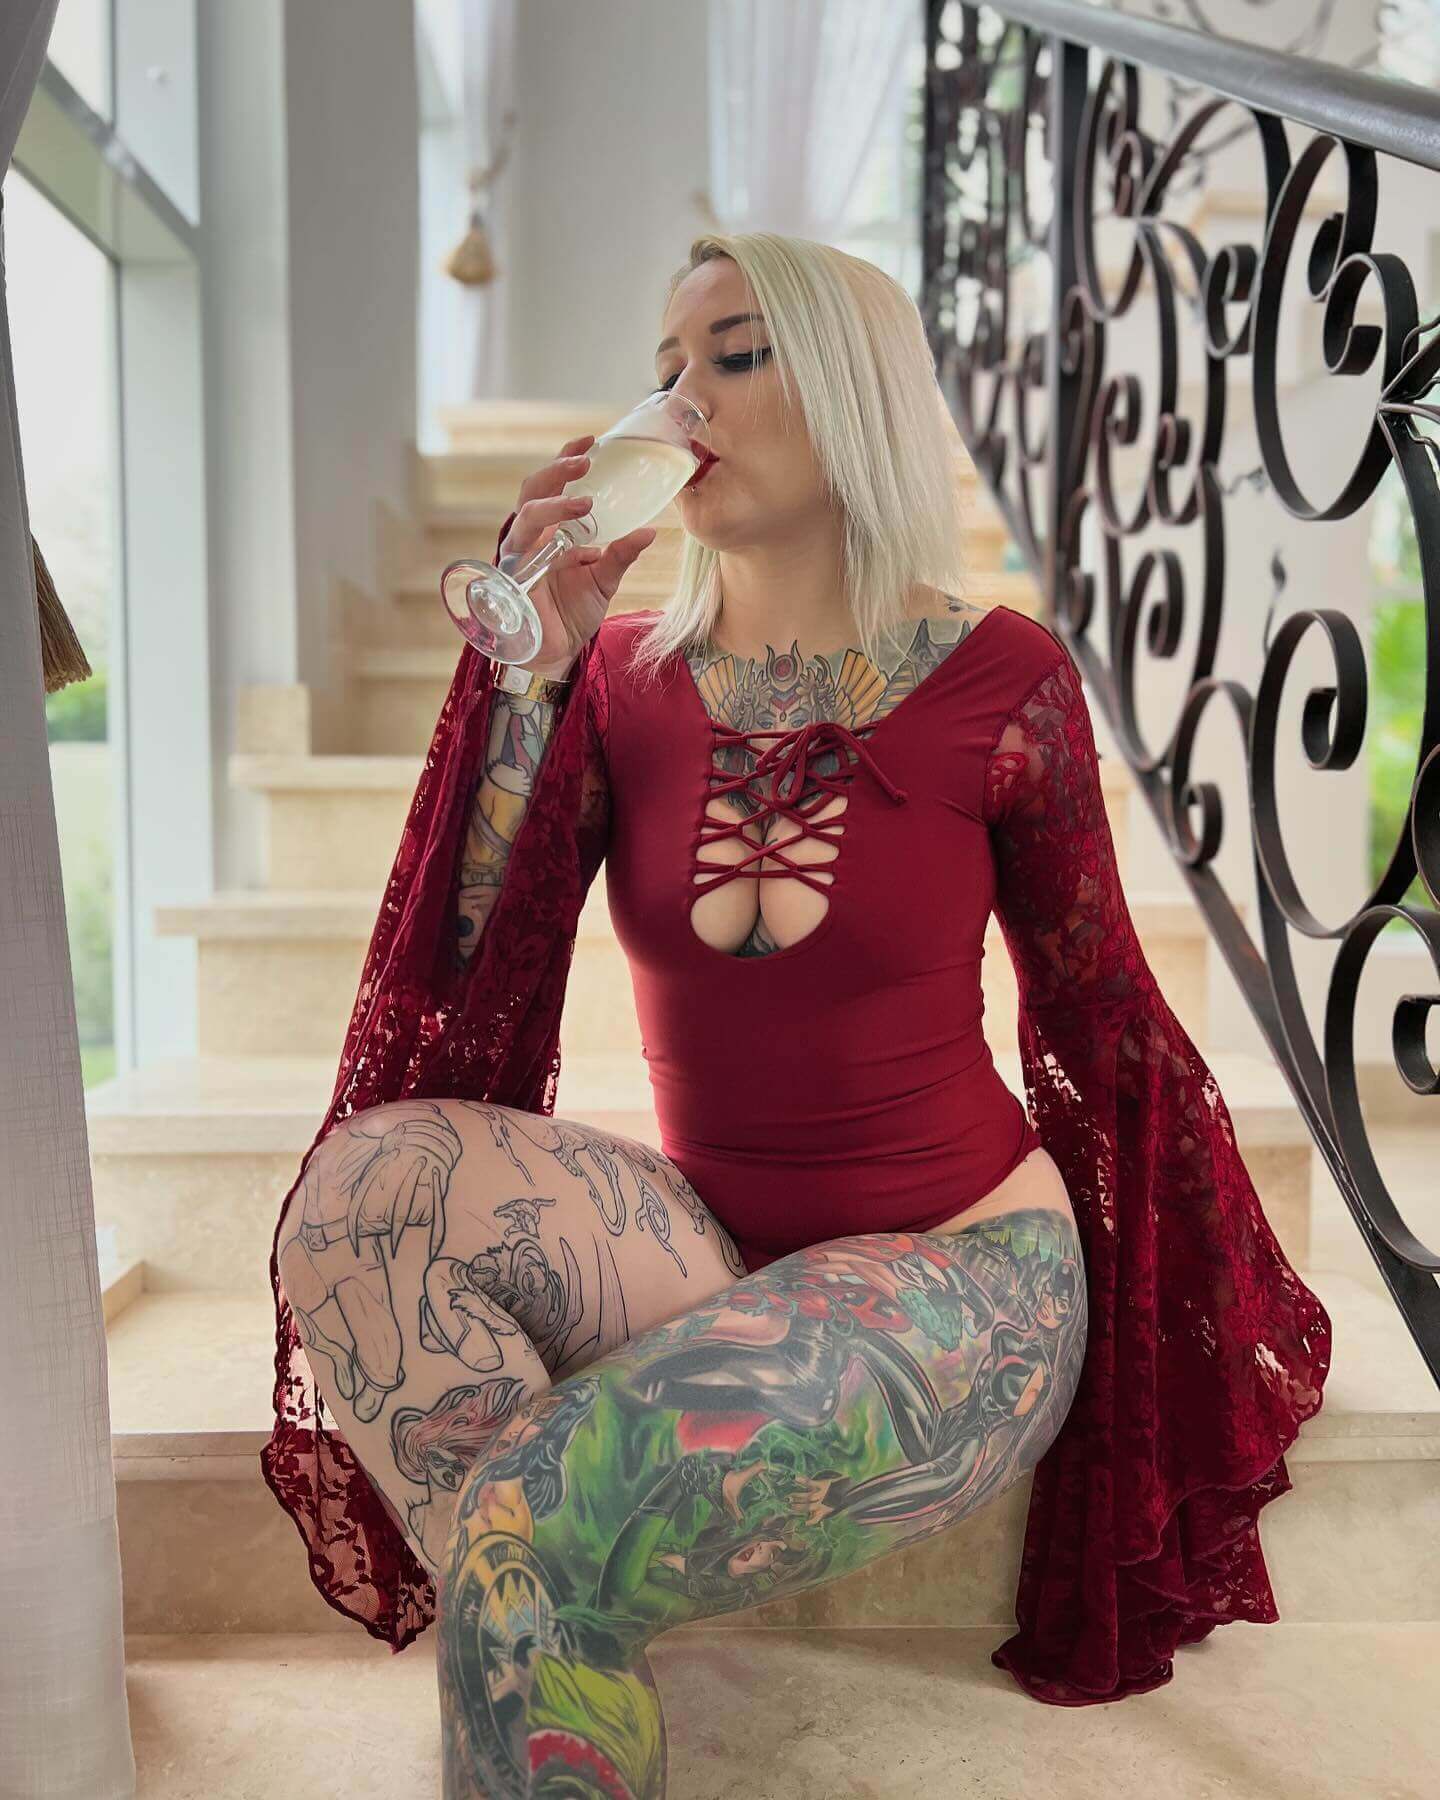 Elegant scene with a tattooed woman in a red lace-sleeved rave bodysuit from Freedom Rave Wear, sipping champagne